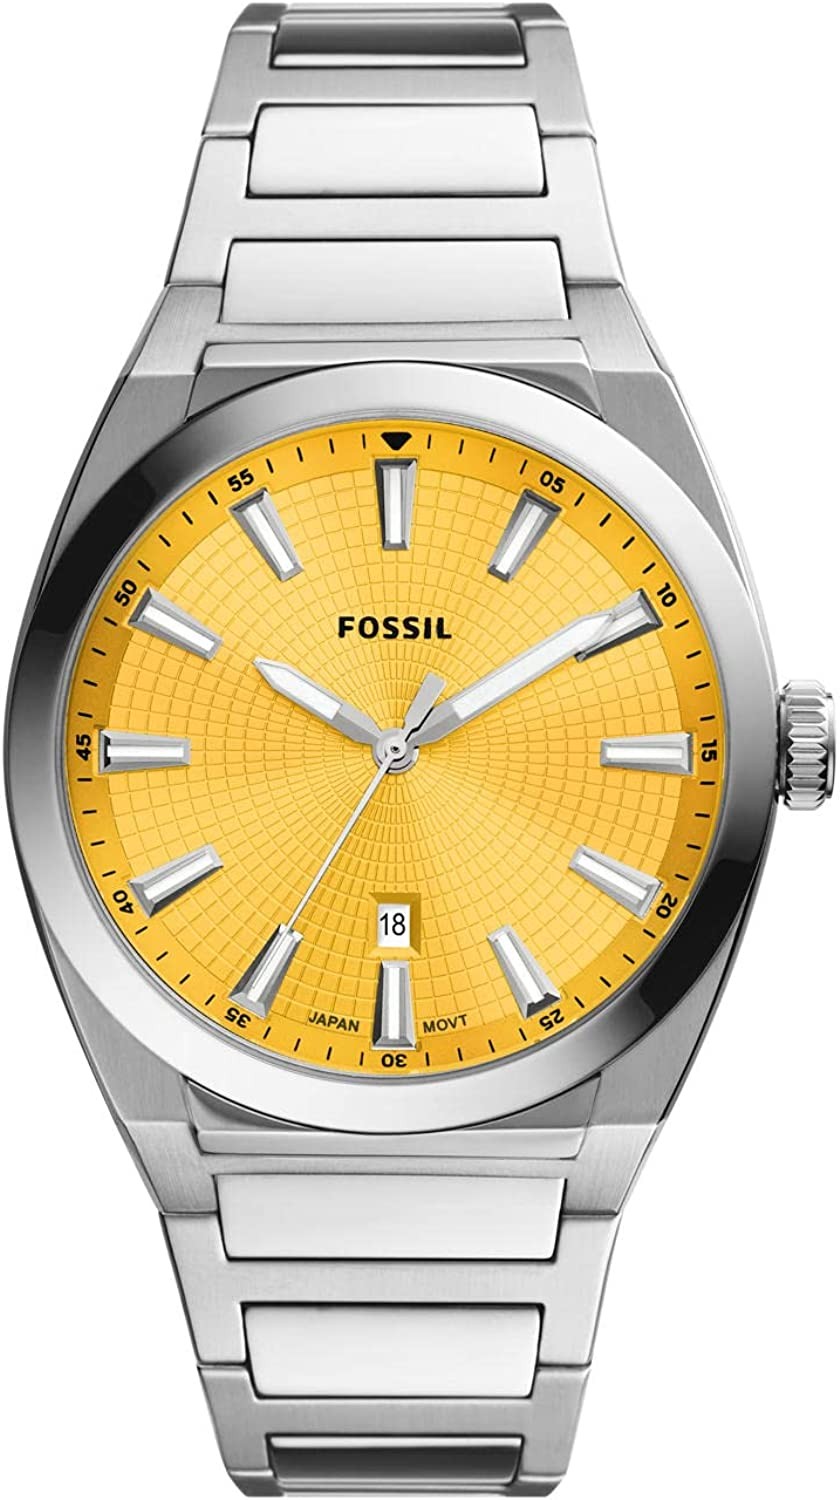 Fossil Everett Men's Watch with Stainless Steel or Leather Band Best ...